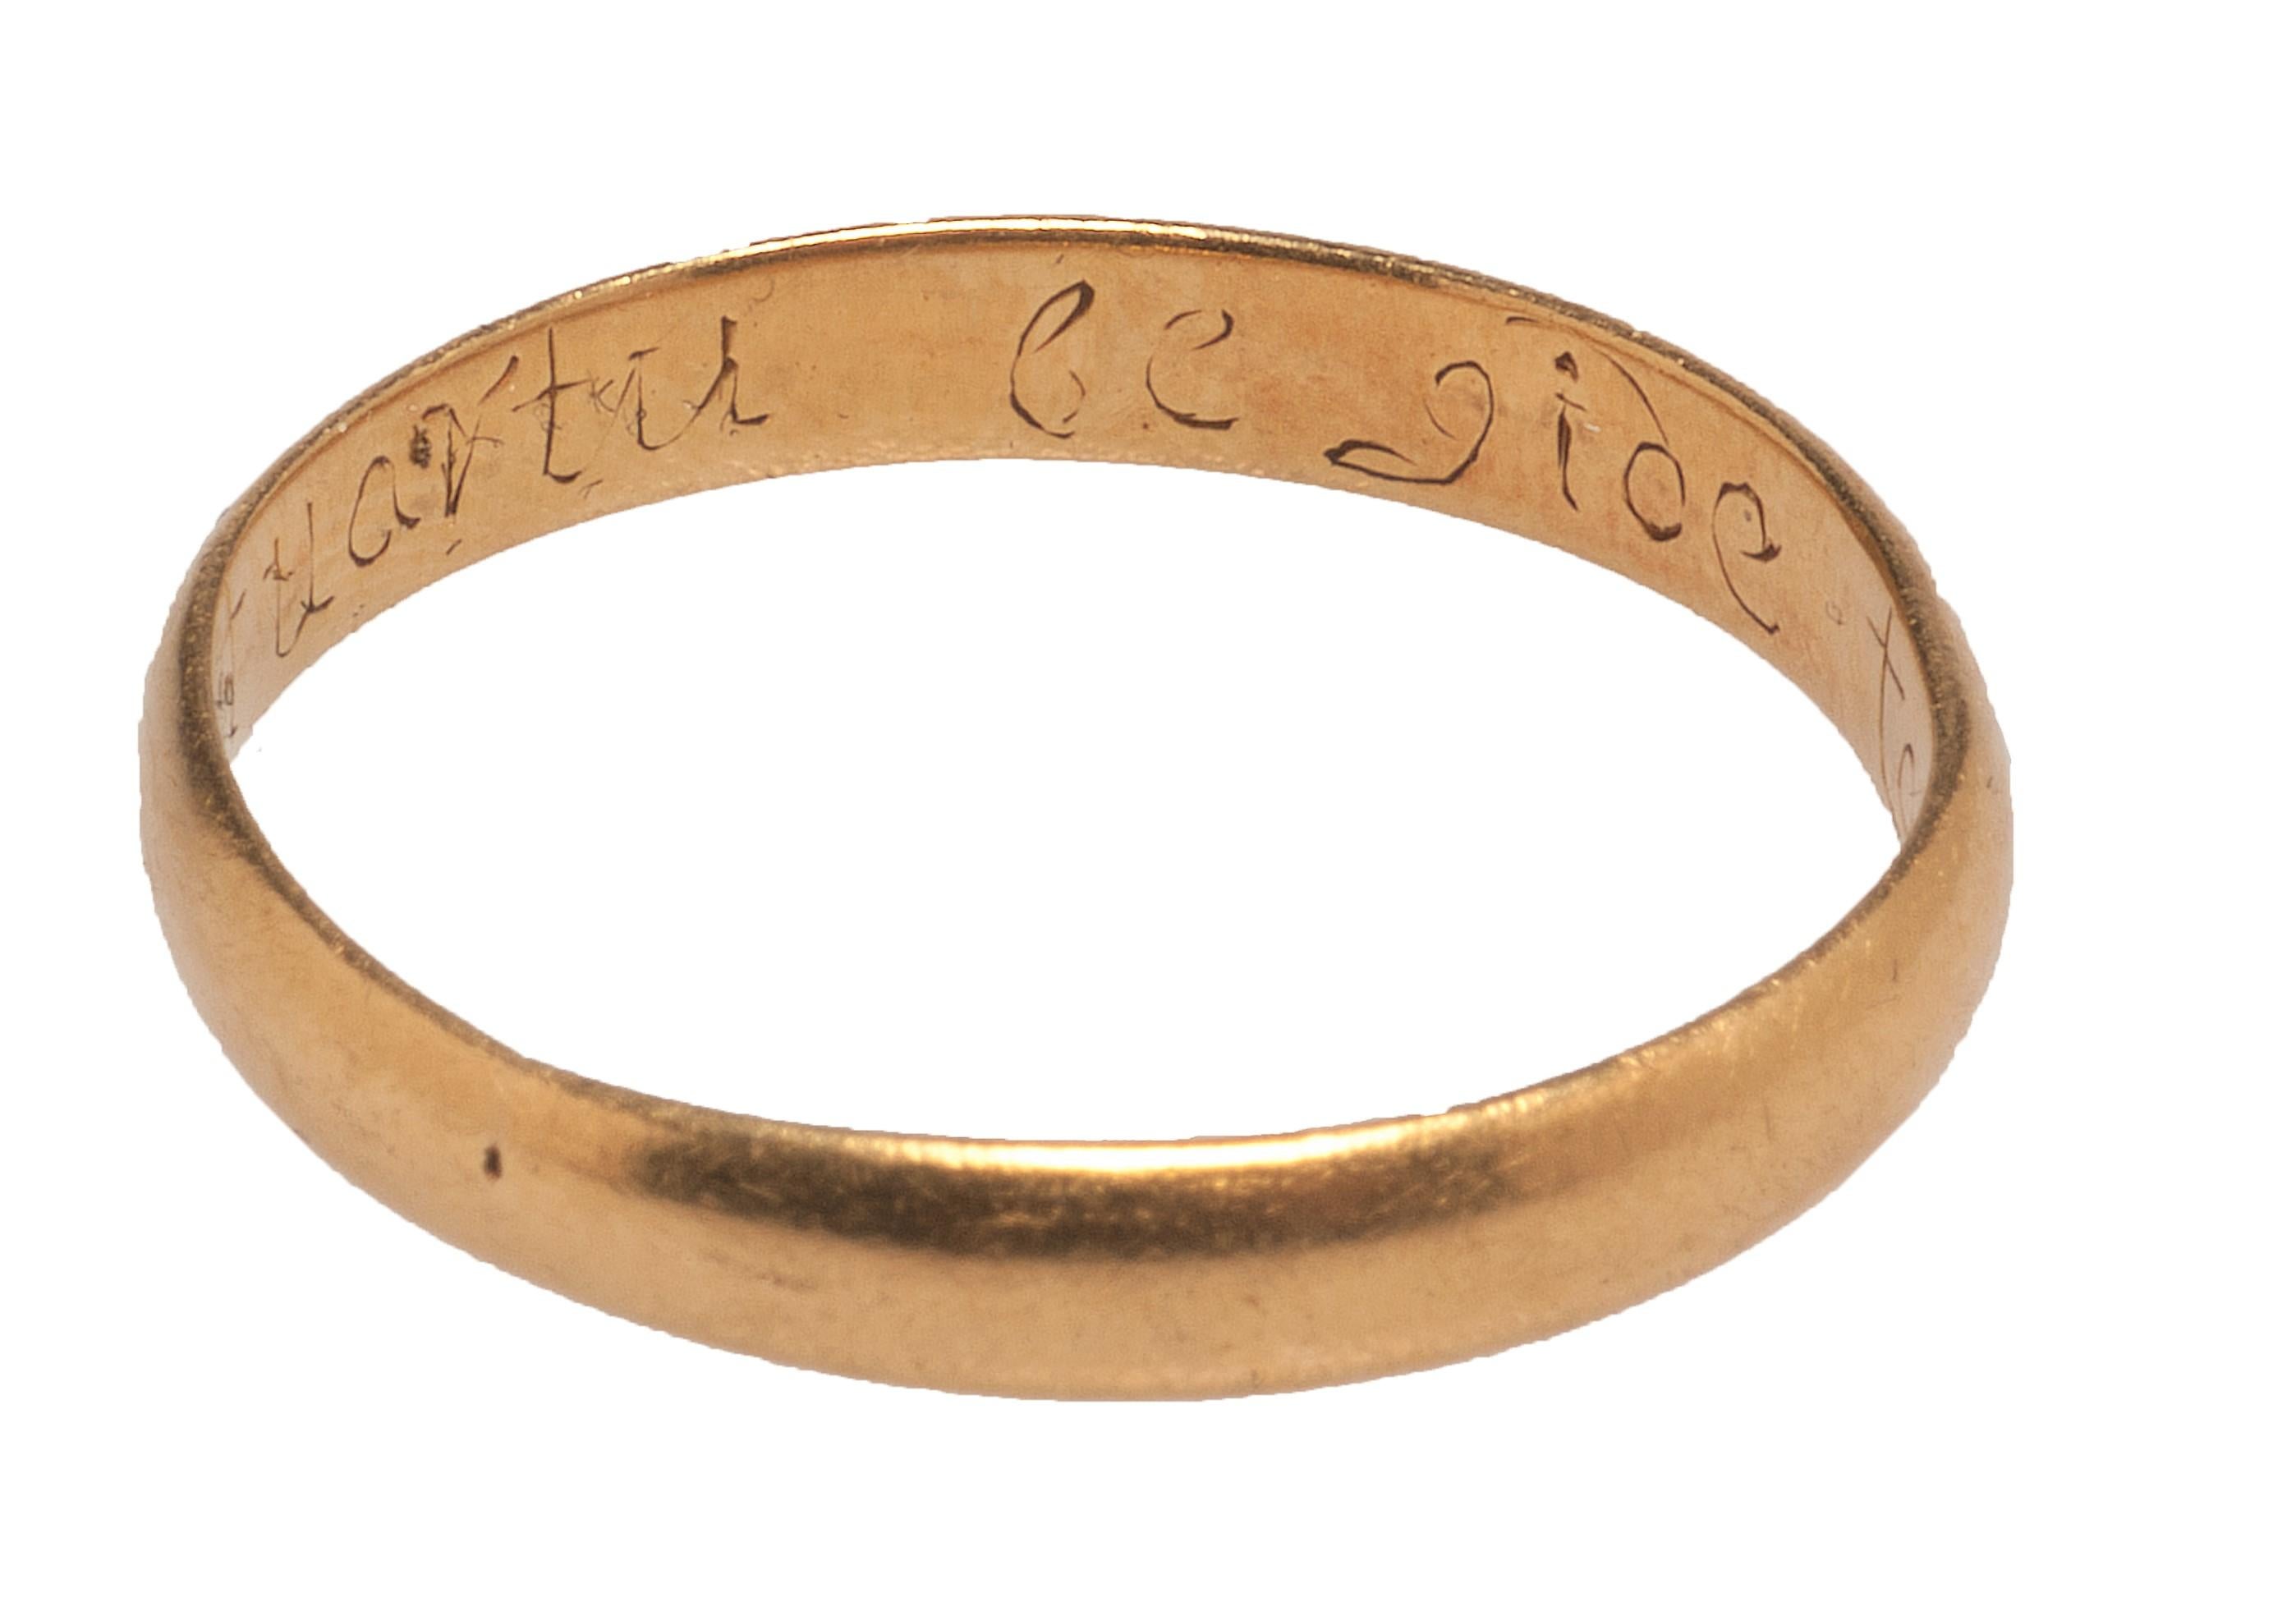 POSY RING “LET UARTU BE GIDE TO THE” 
England, 17th Century 
Gold 
Weight 3.1g; circumference: 60.1mm ;  size: US 9.25, UK S 

Medium hoop, with rounded exterior and flat interior. Italic inscription reads: “Let uartu be gide to the.” A maker’s